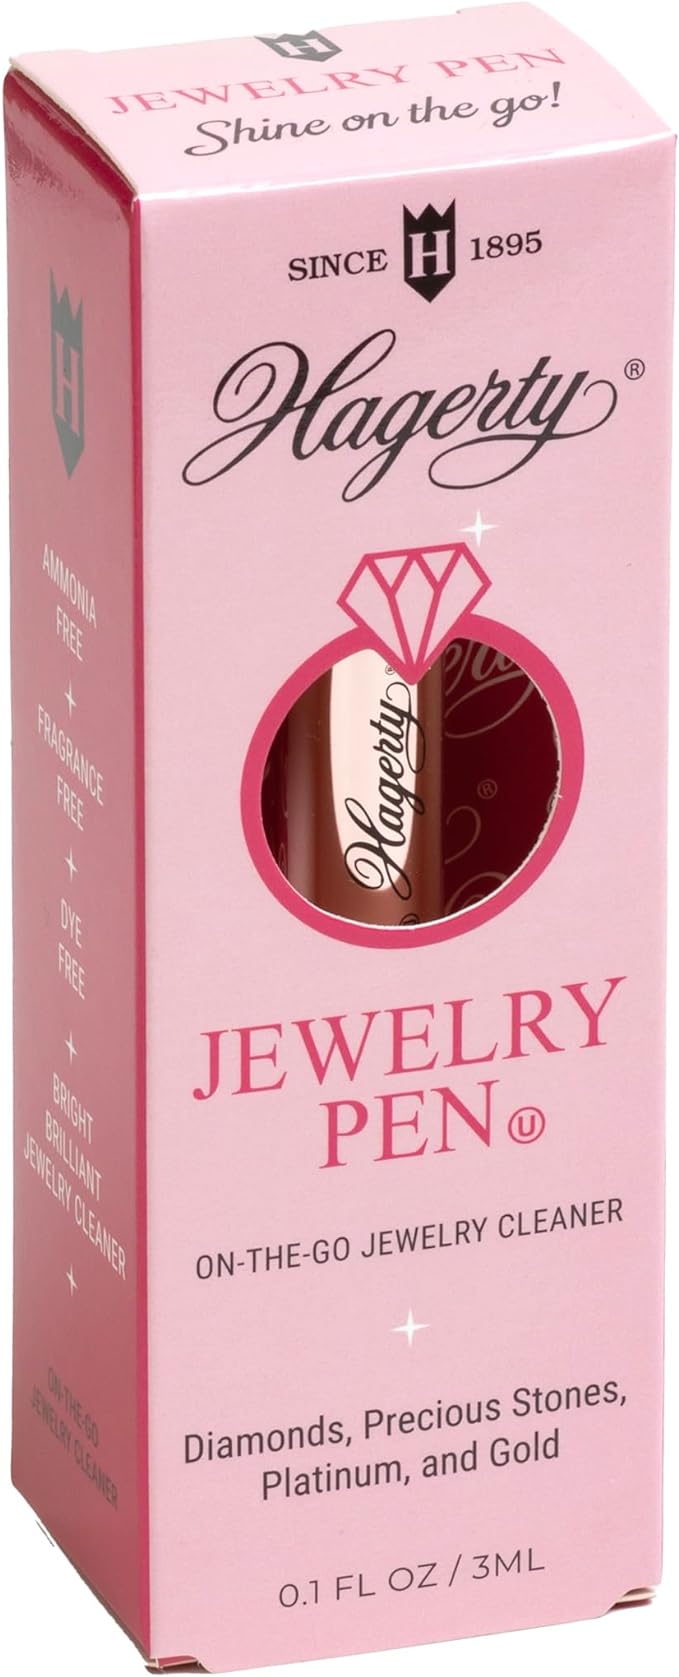 Hagerty Jewelry Pen for On-The-Go Jewelry Cleaning